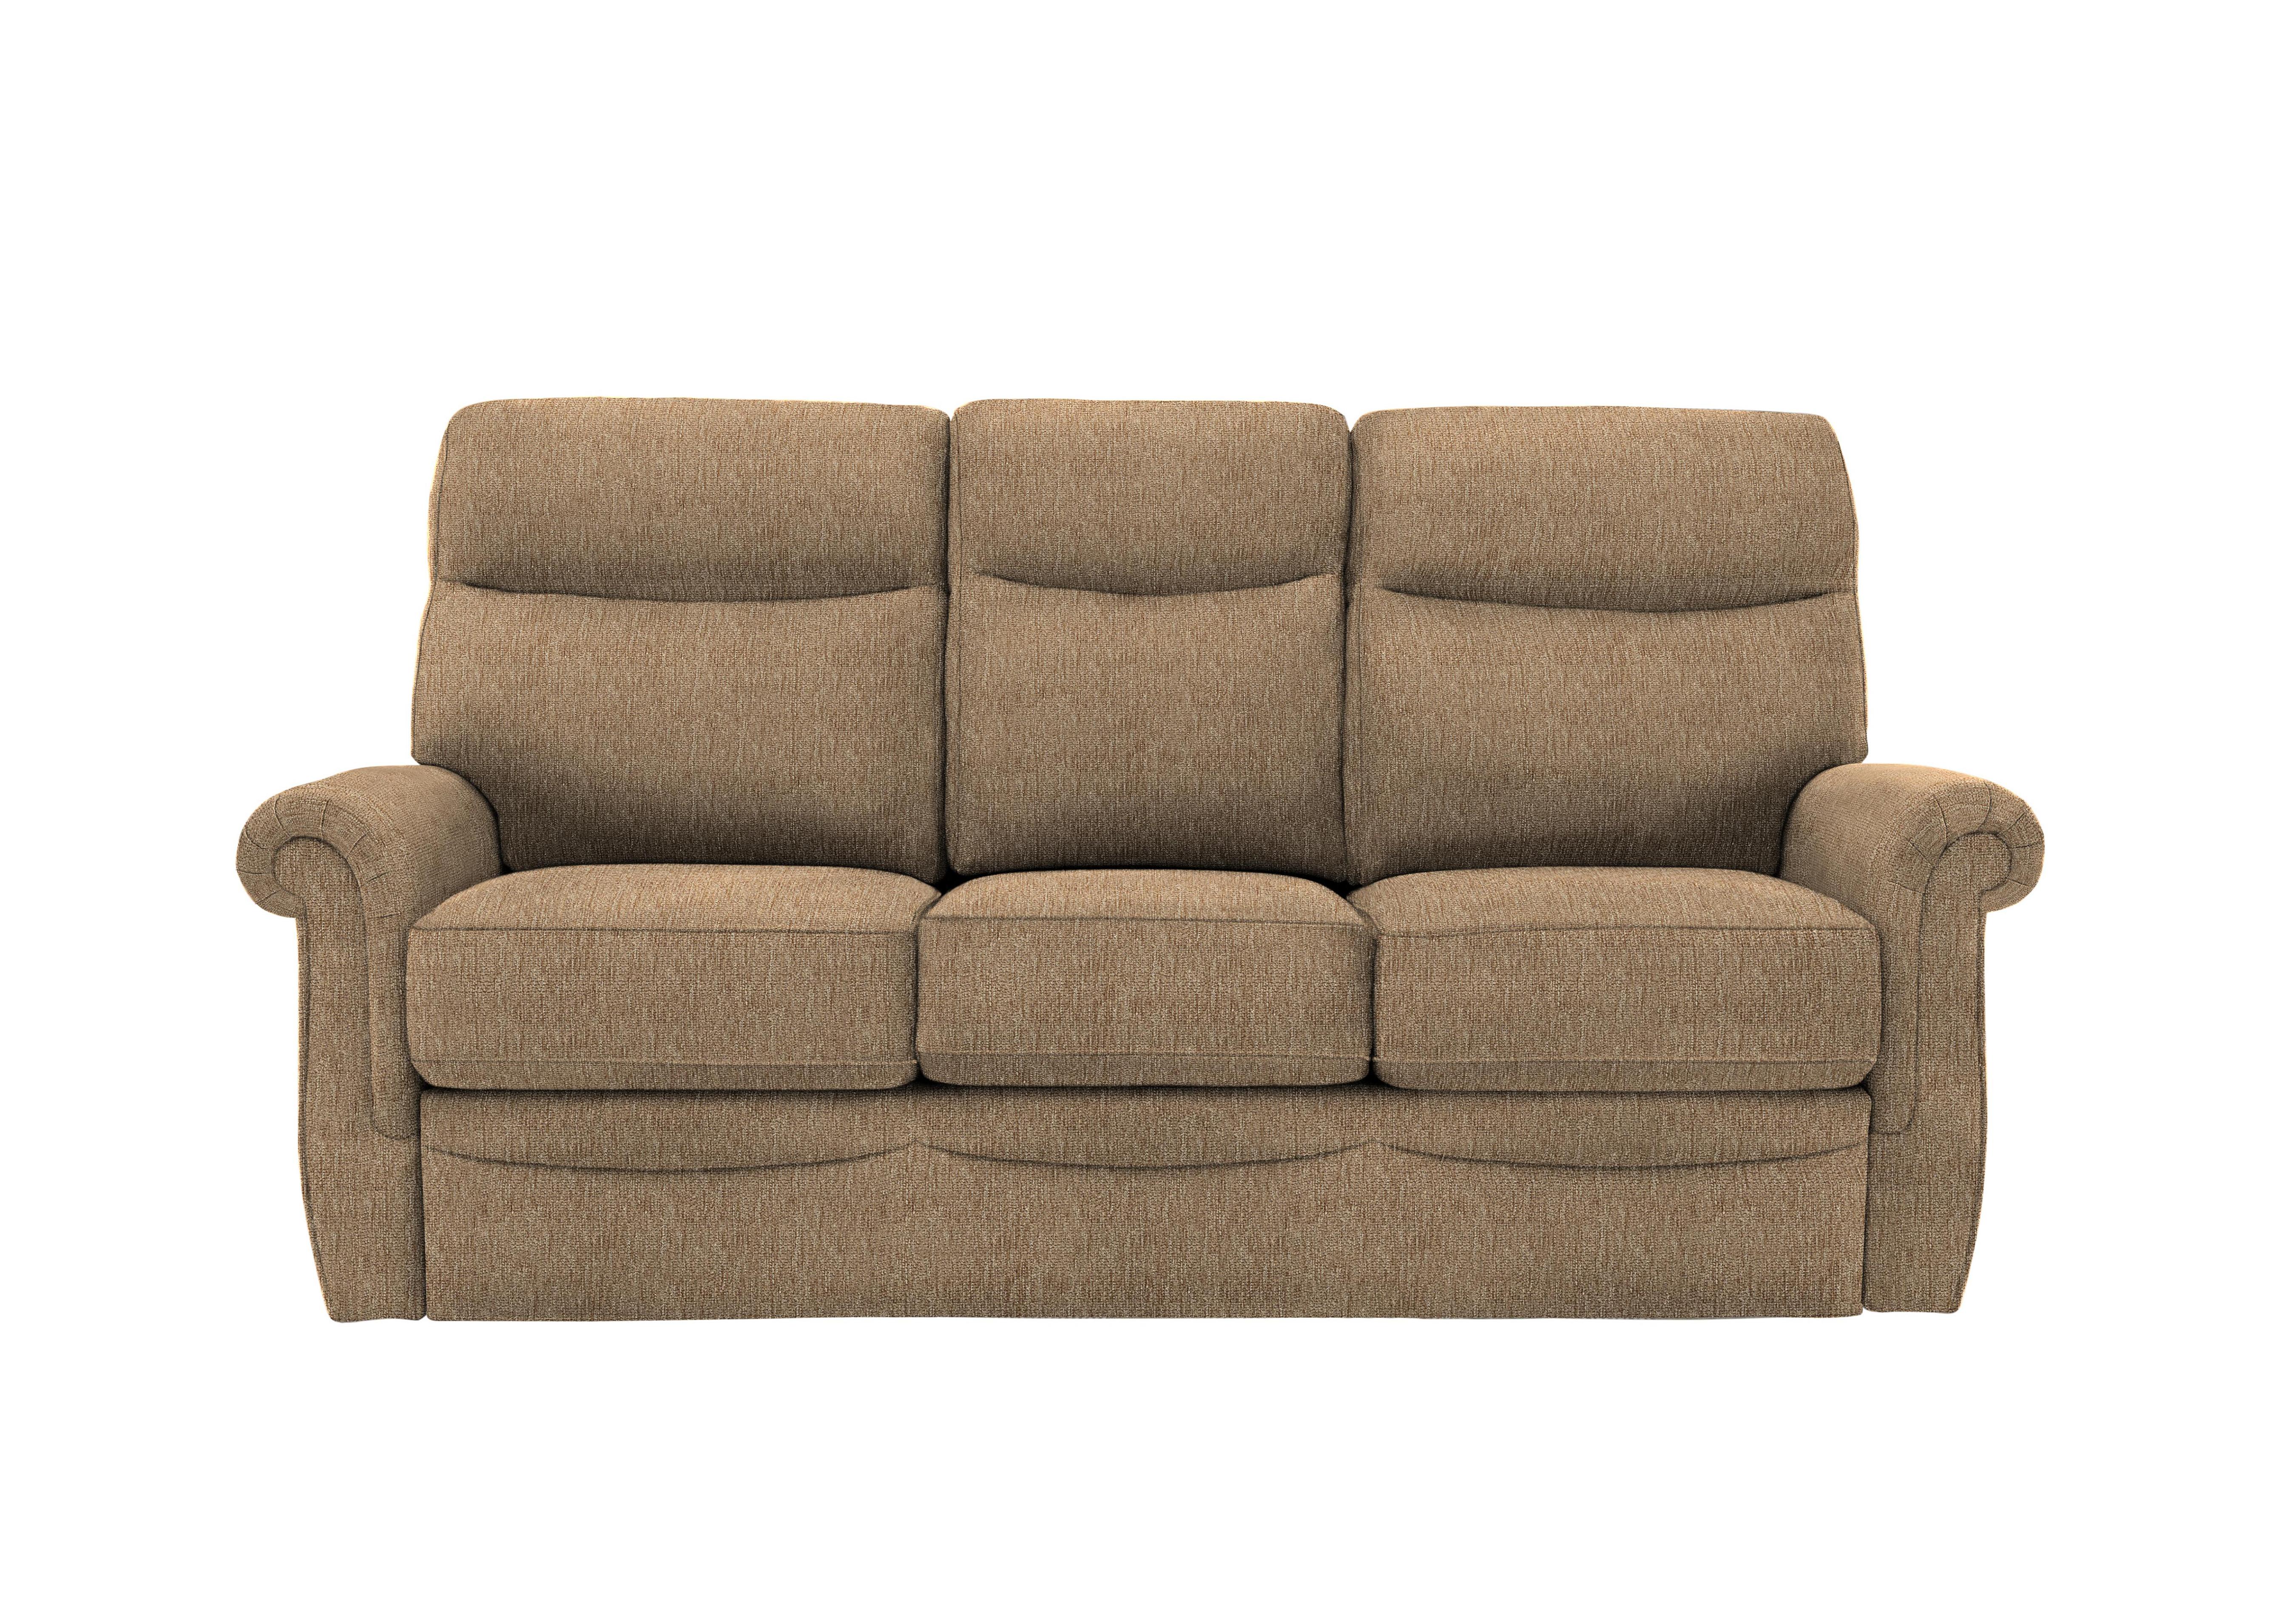 Avon 3 Seater Fabric Sofa in A070 Boucle Cocoa on Furniture Village